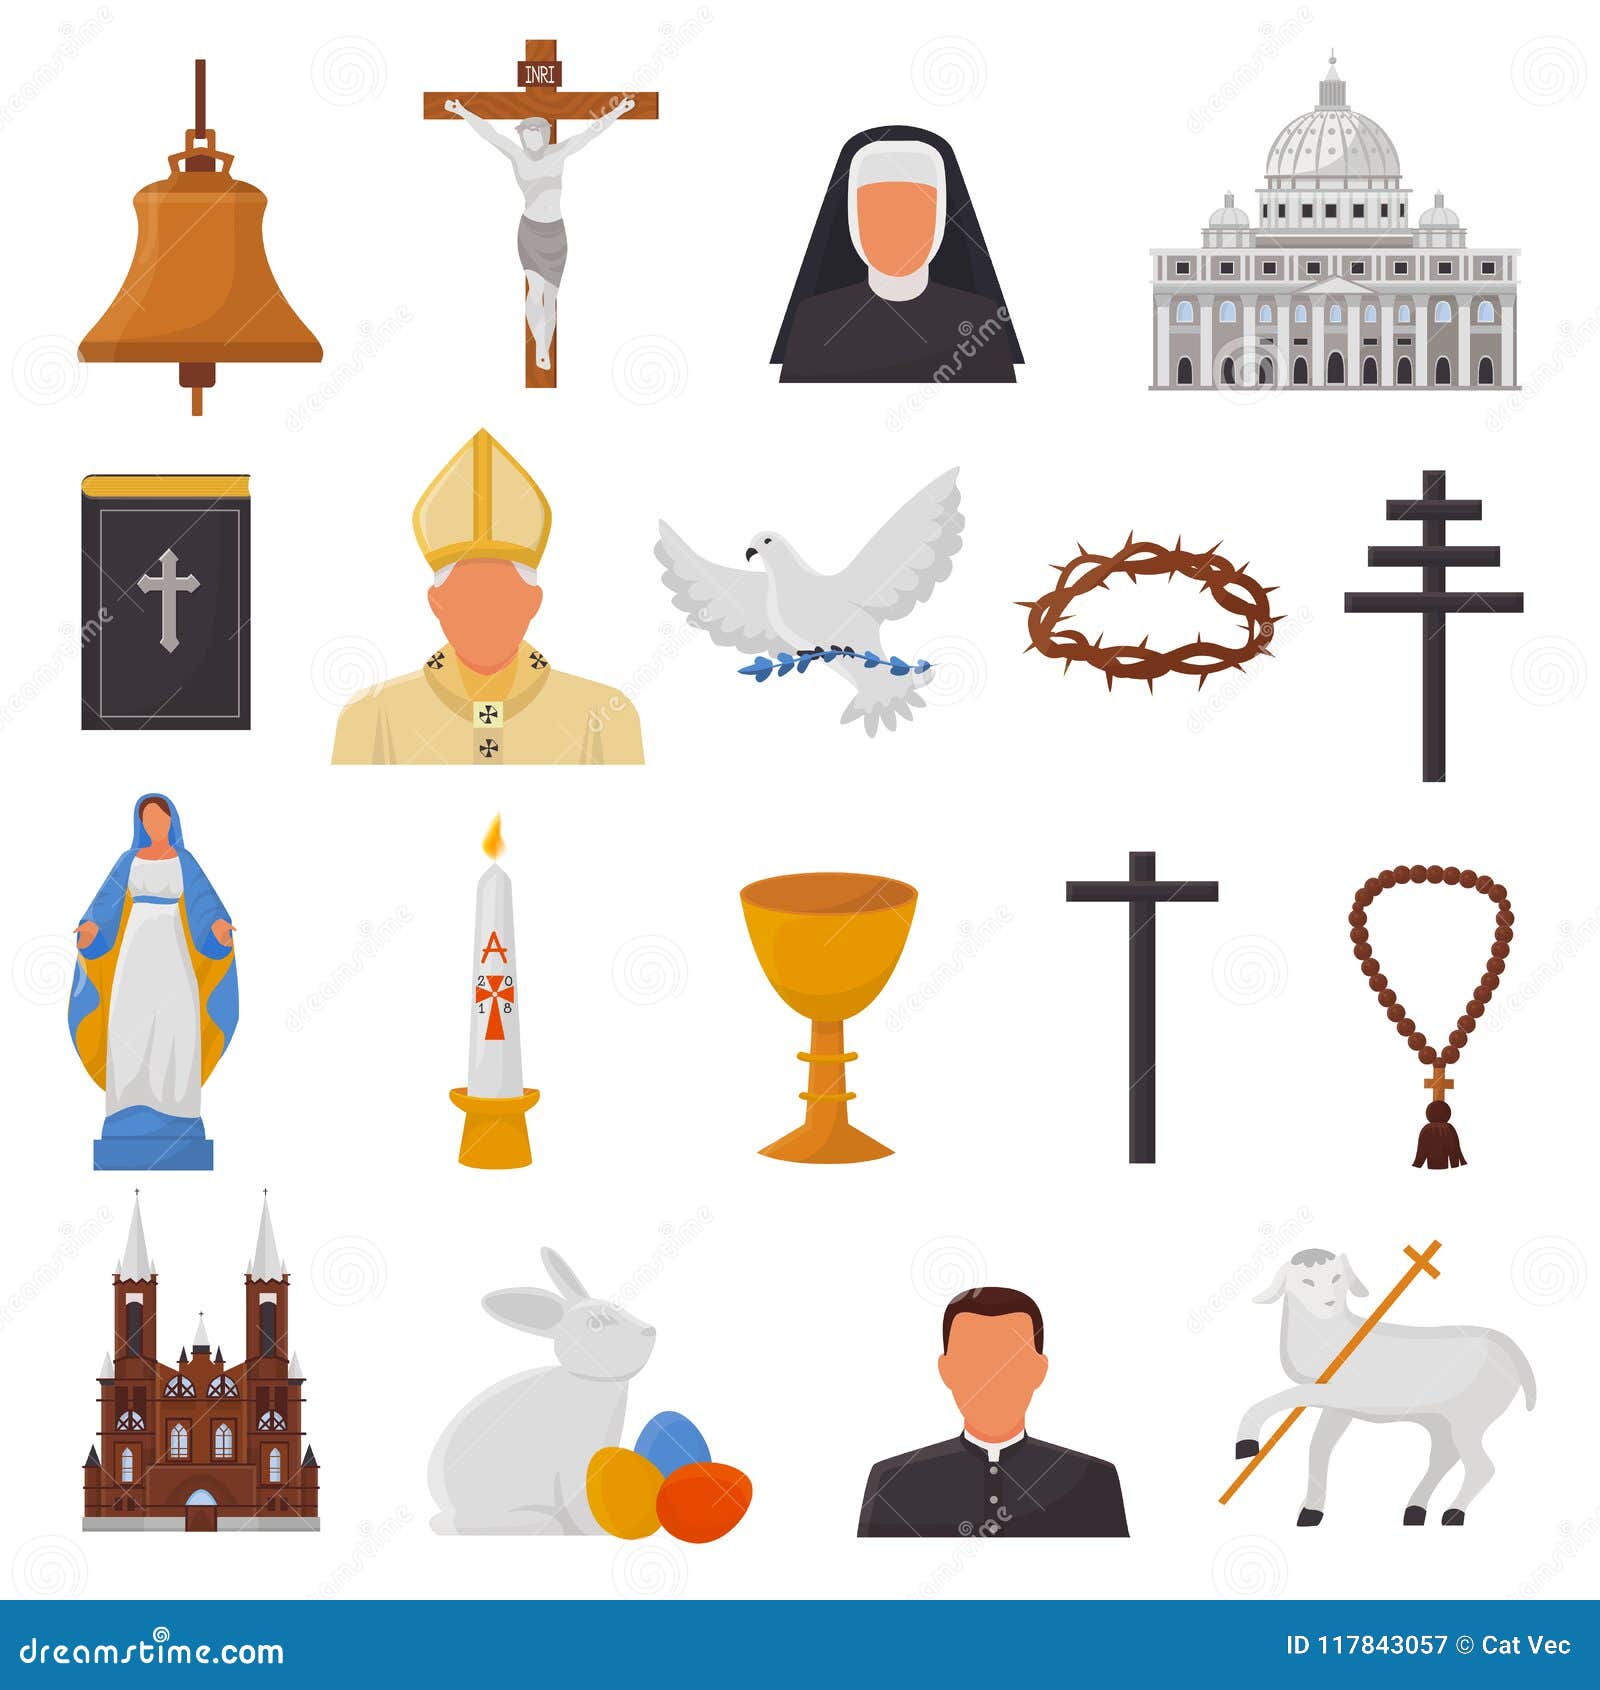 christian religious symbols and meanings